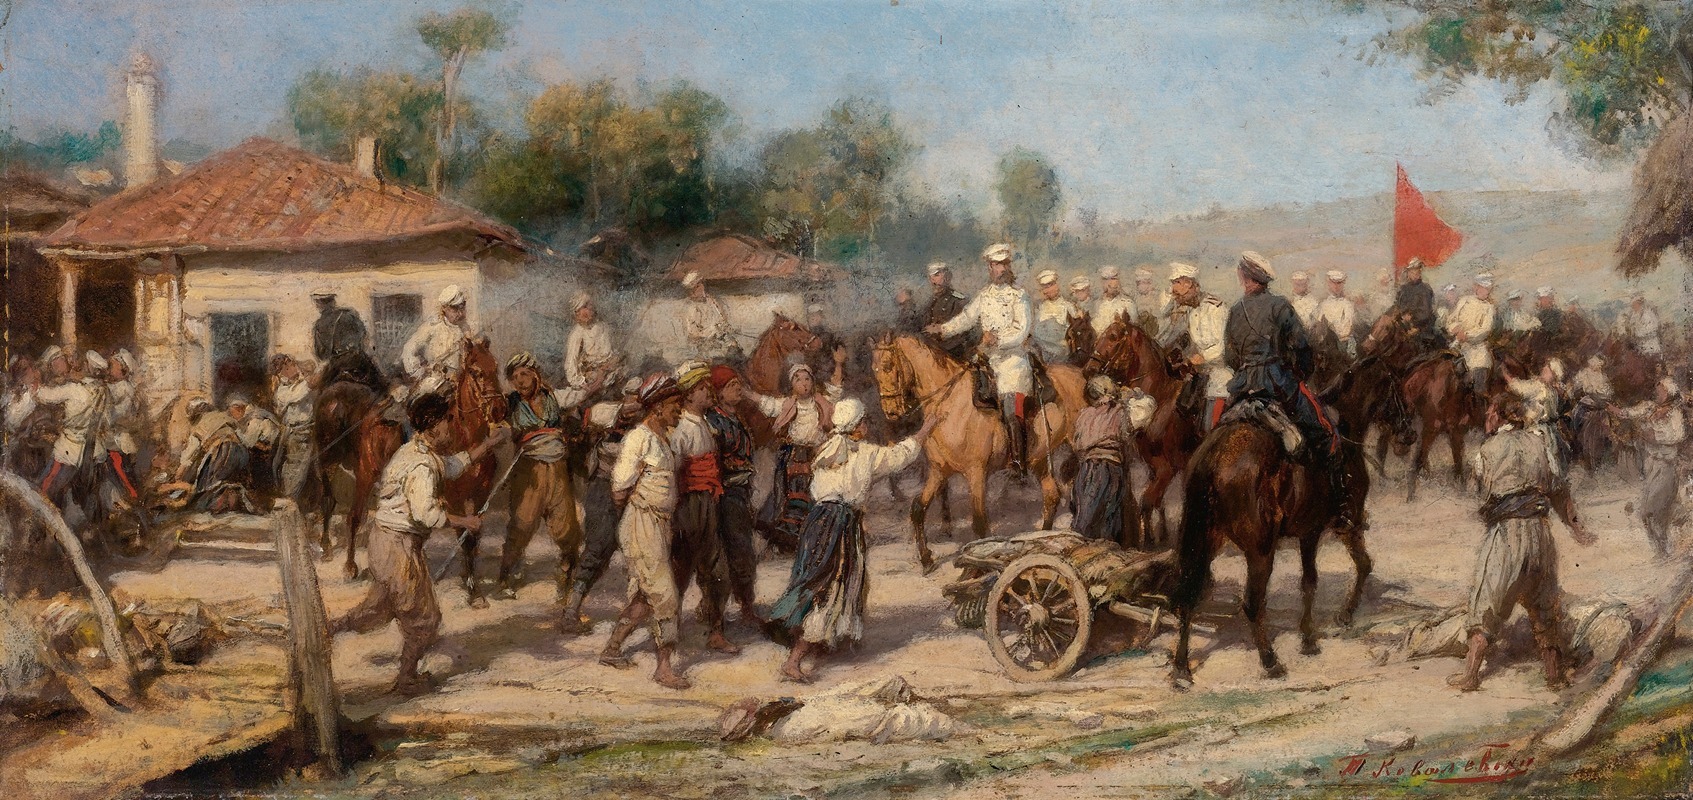 Pavel Osipovich Kovalevsky - An Episode From The 1877-78 War; Russian Troops Liberate A Balkan Village From The Turks